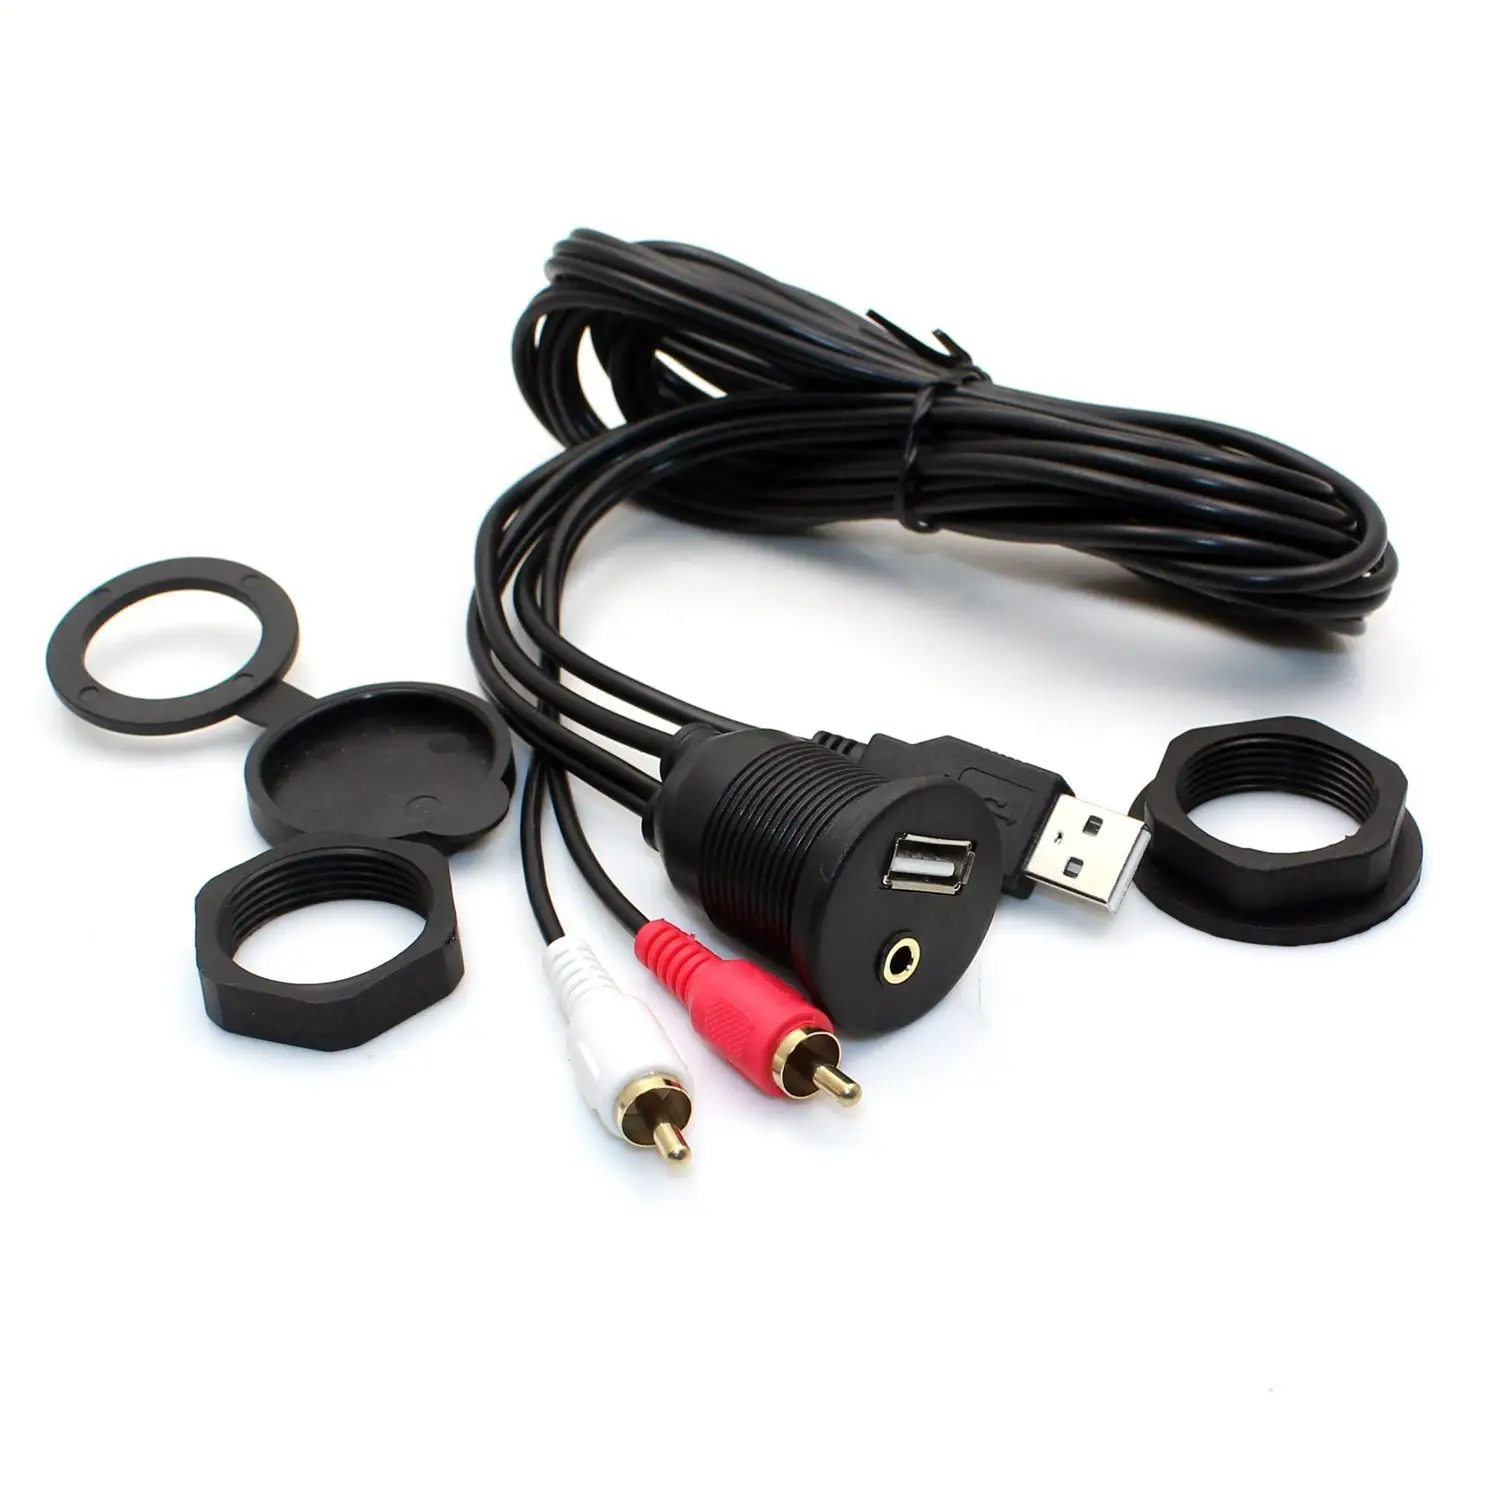 USB & 3.5mm to 2 RCA and USB AUX Flush Mount Dash Extension Audio&Video Cable